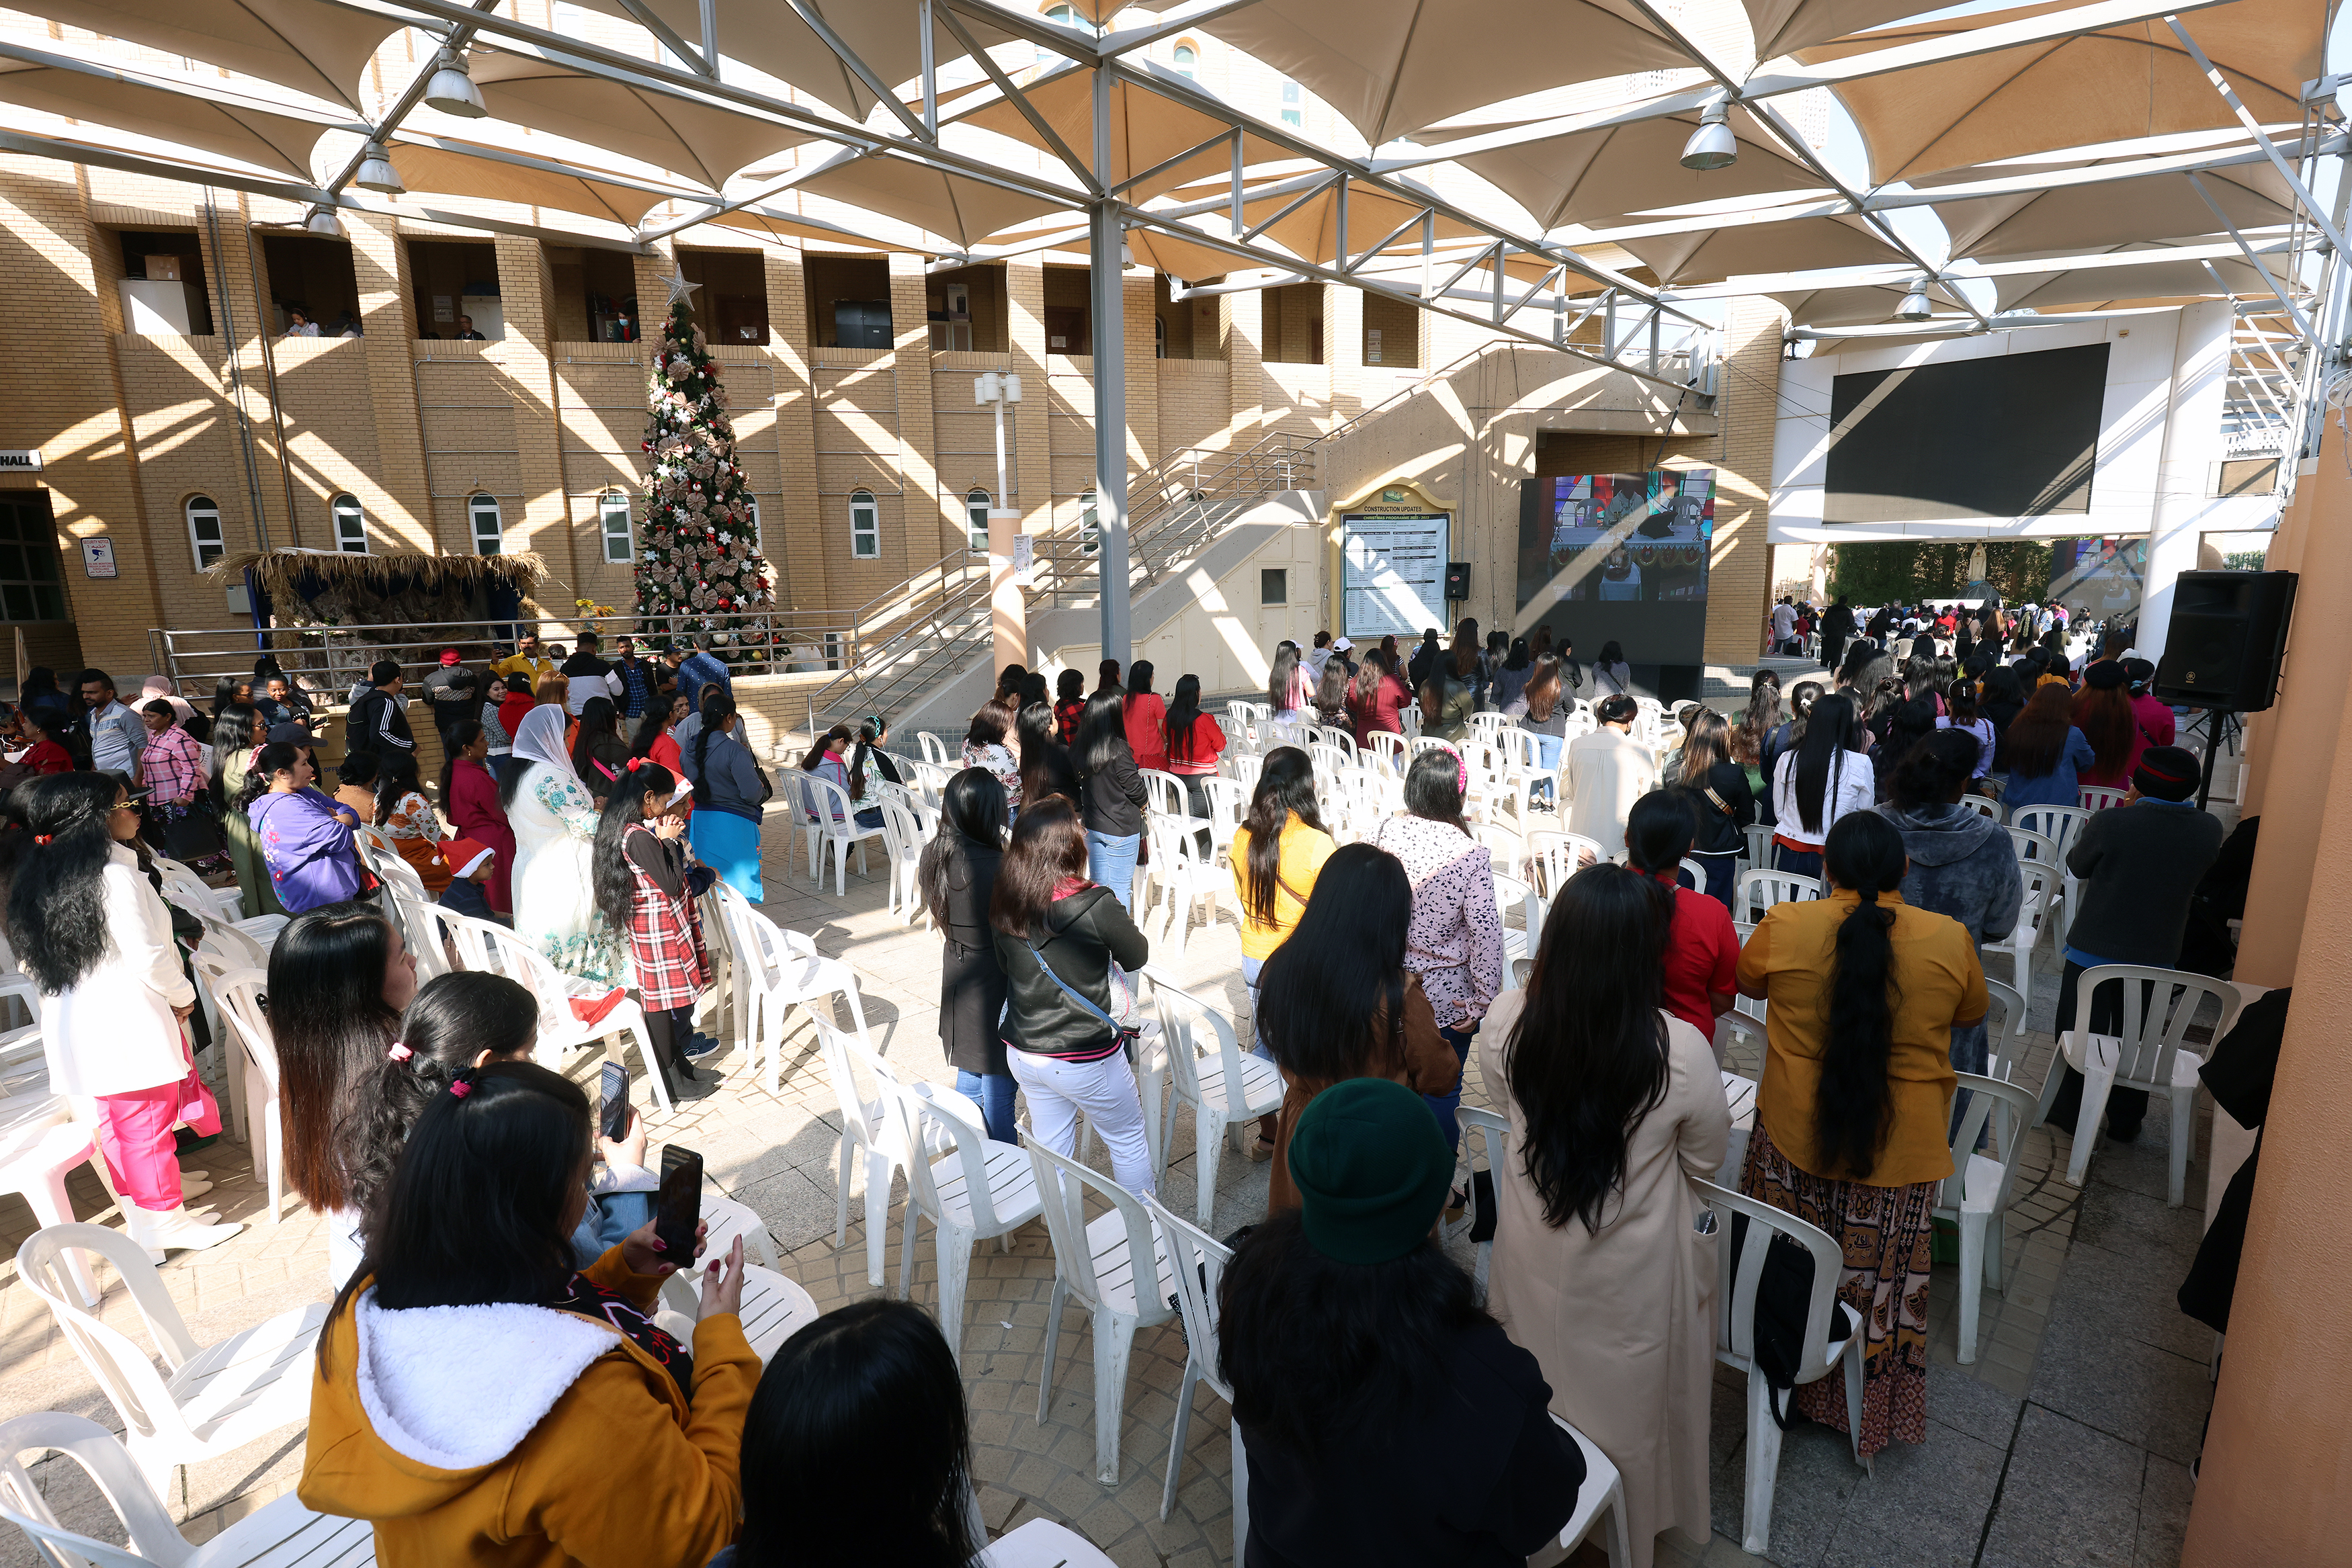 Christian worshippers attend a Christmas morning service at the Catholic’s Holy  Family Church in Kuwait City on December 25, 2022.